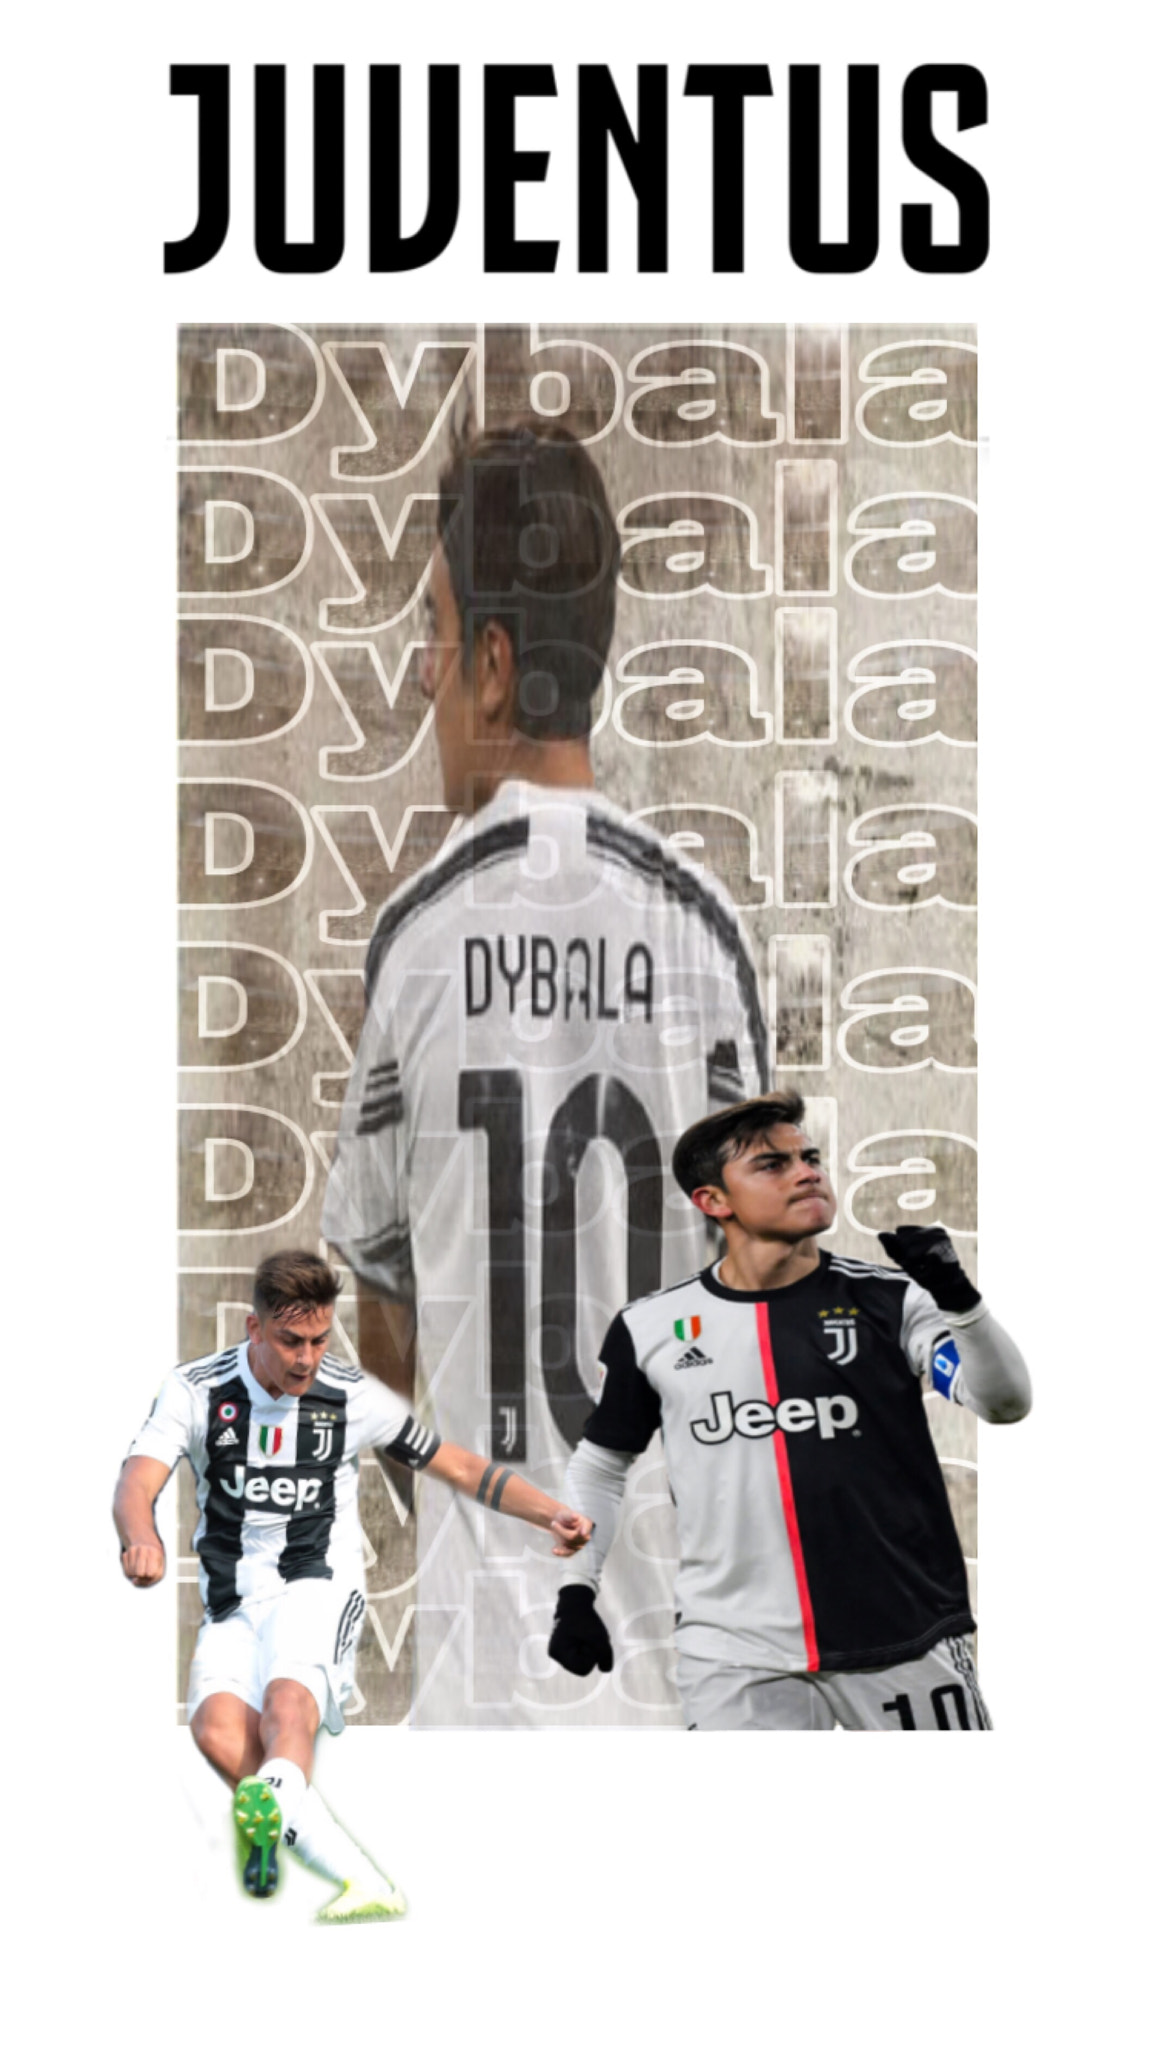 Paulo Dybala is an argentine football player.